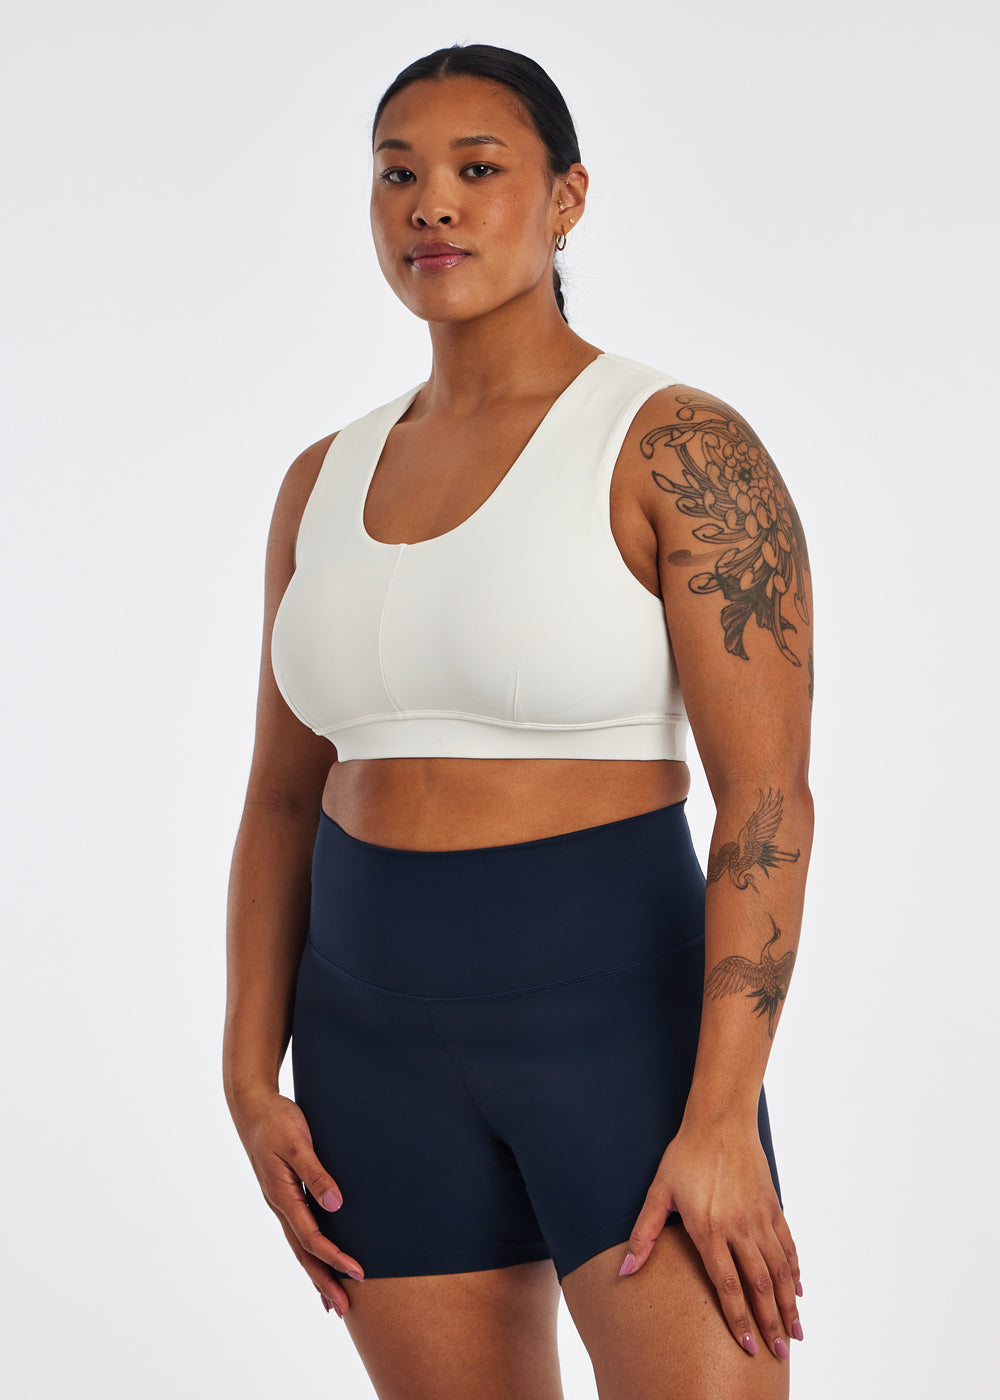 Women's - Compression Fit Sport Bras or Long Sleeves or Short Sleeves in  Black or White or Blue or Red for Training